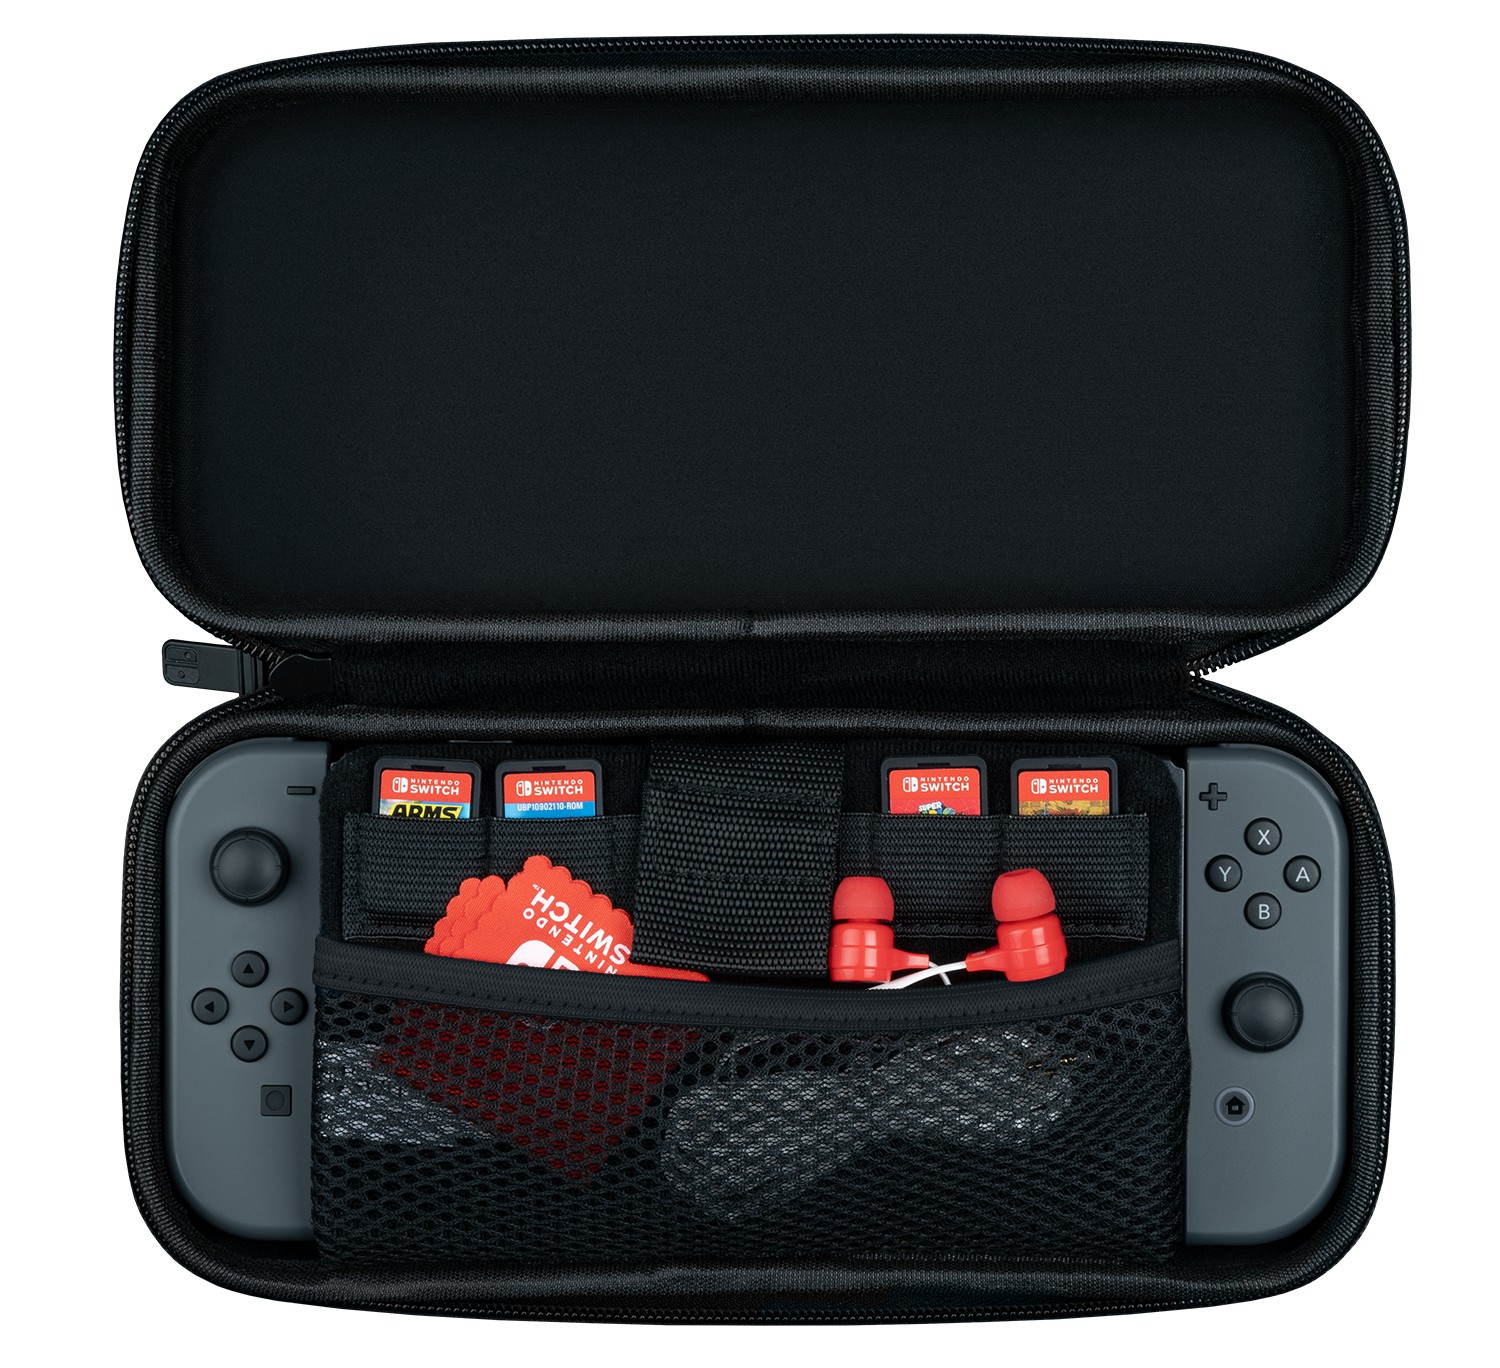 PDP Deluxe Travel Case - Elite Edition For Nintendo Switch